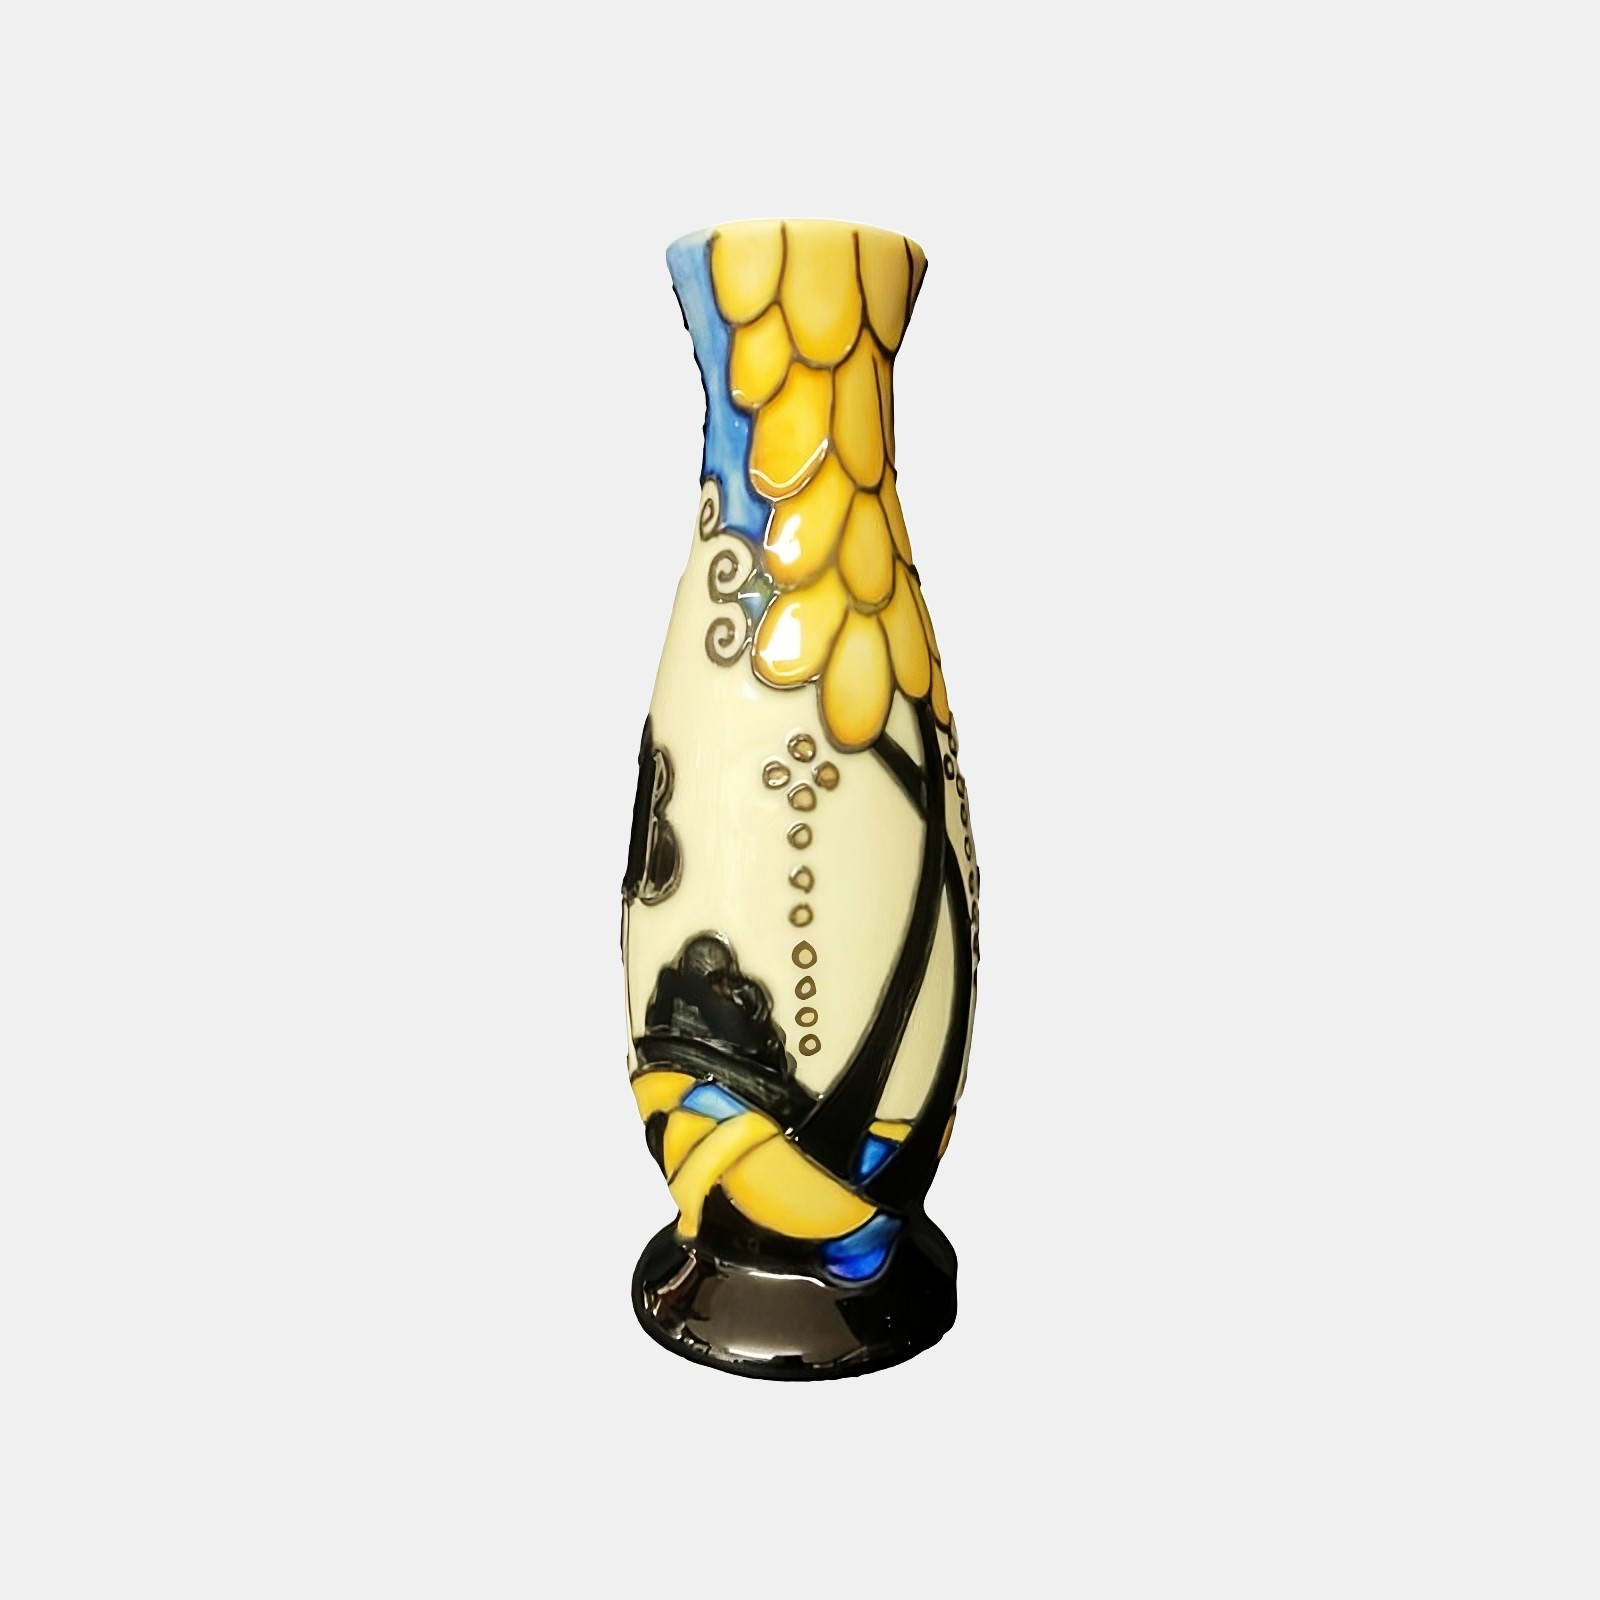 small vase flower design tube lined and hand painted decoration yellow and black artistic